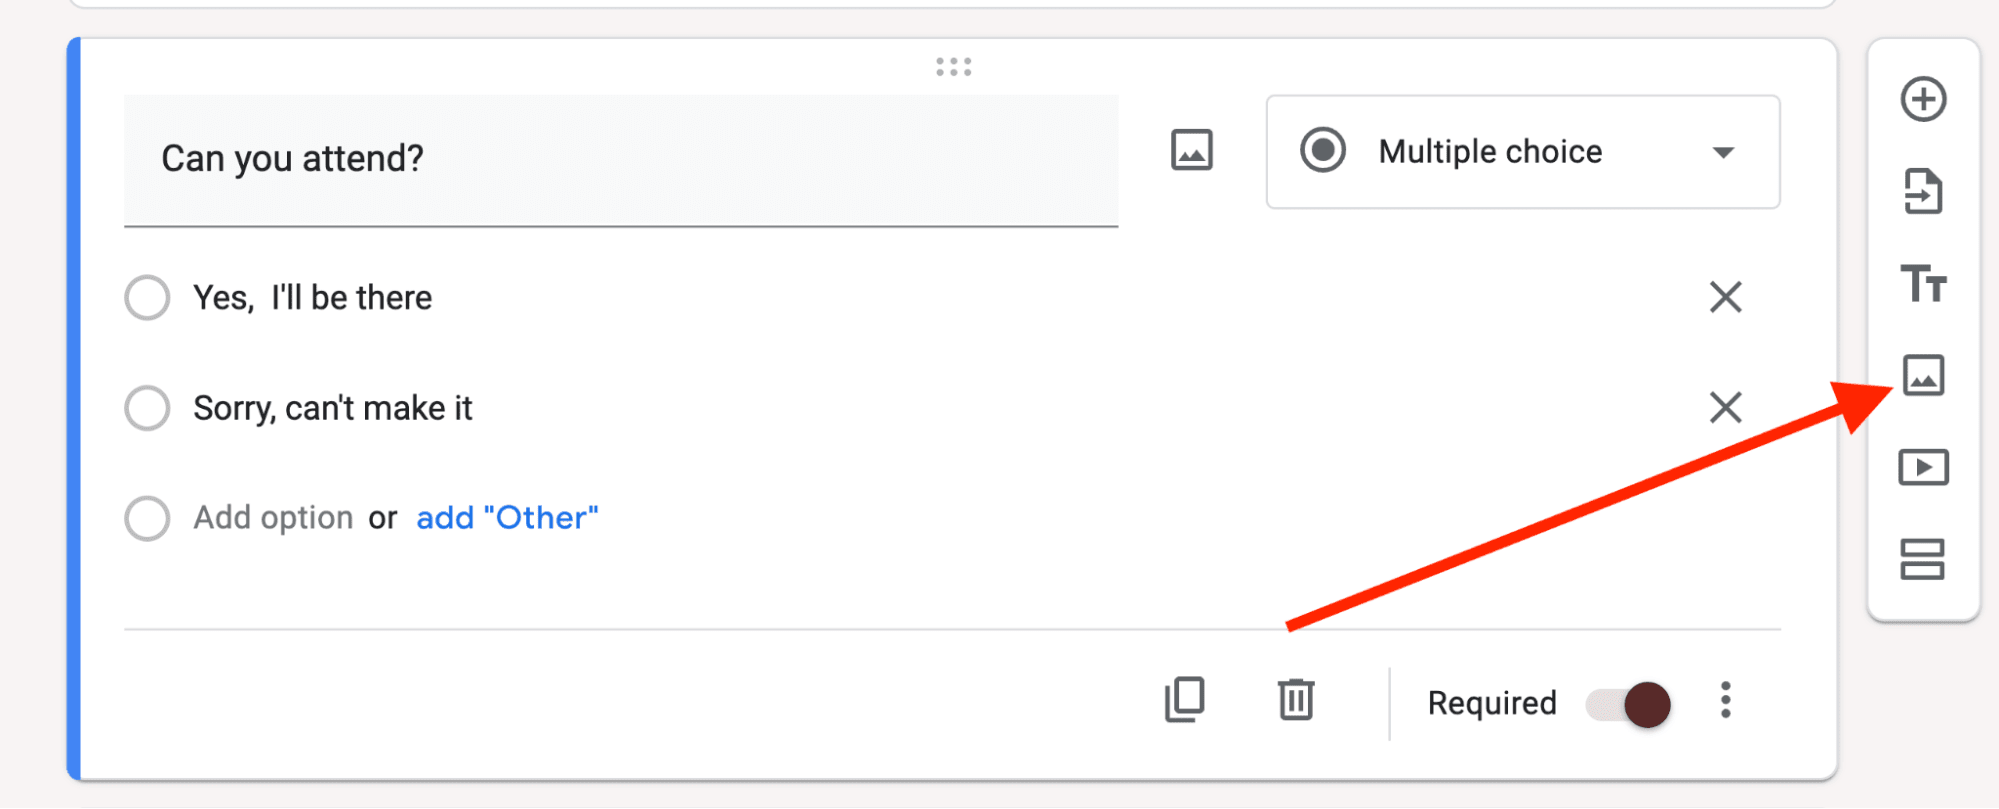 Red arrow pointing towards image icon.